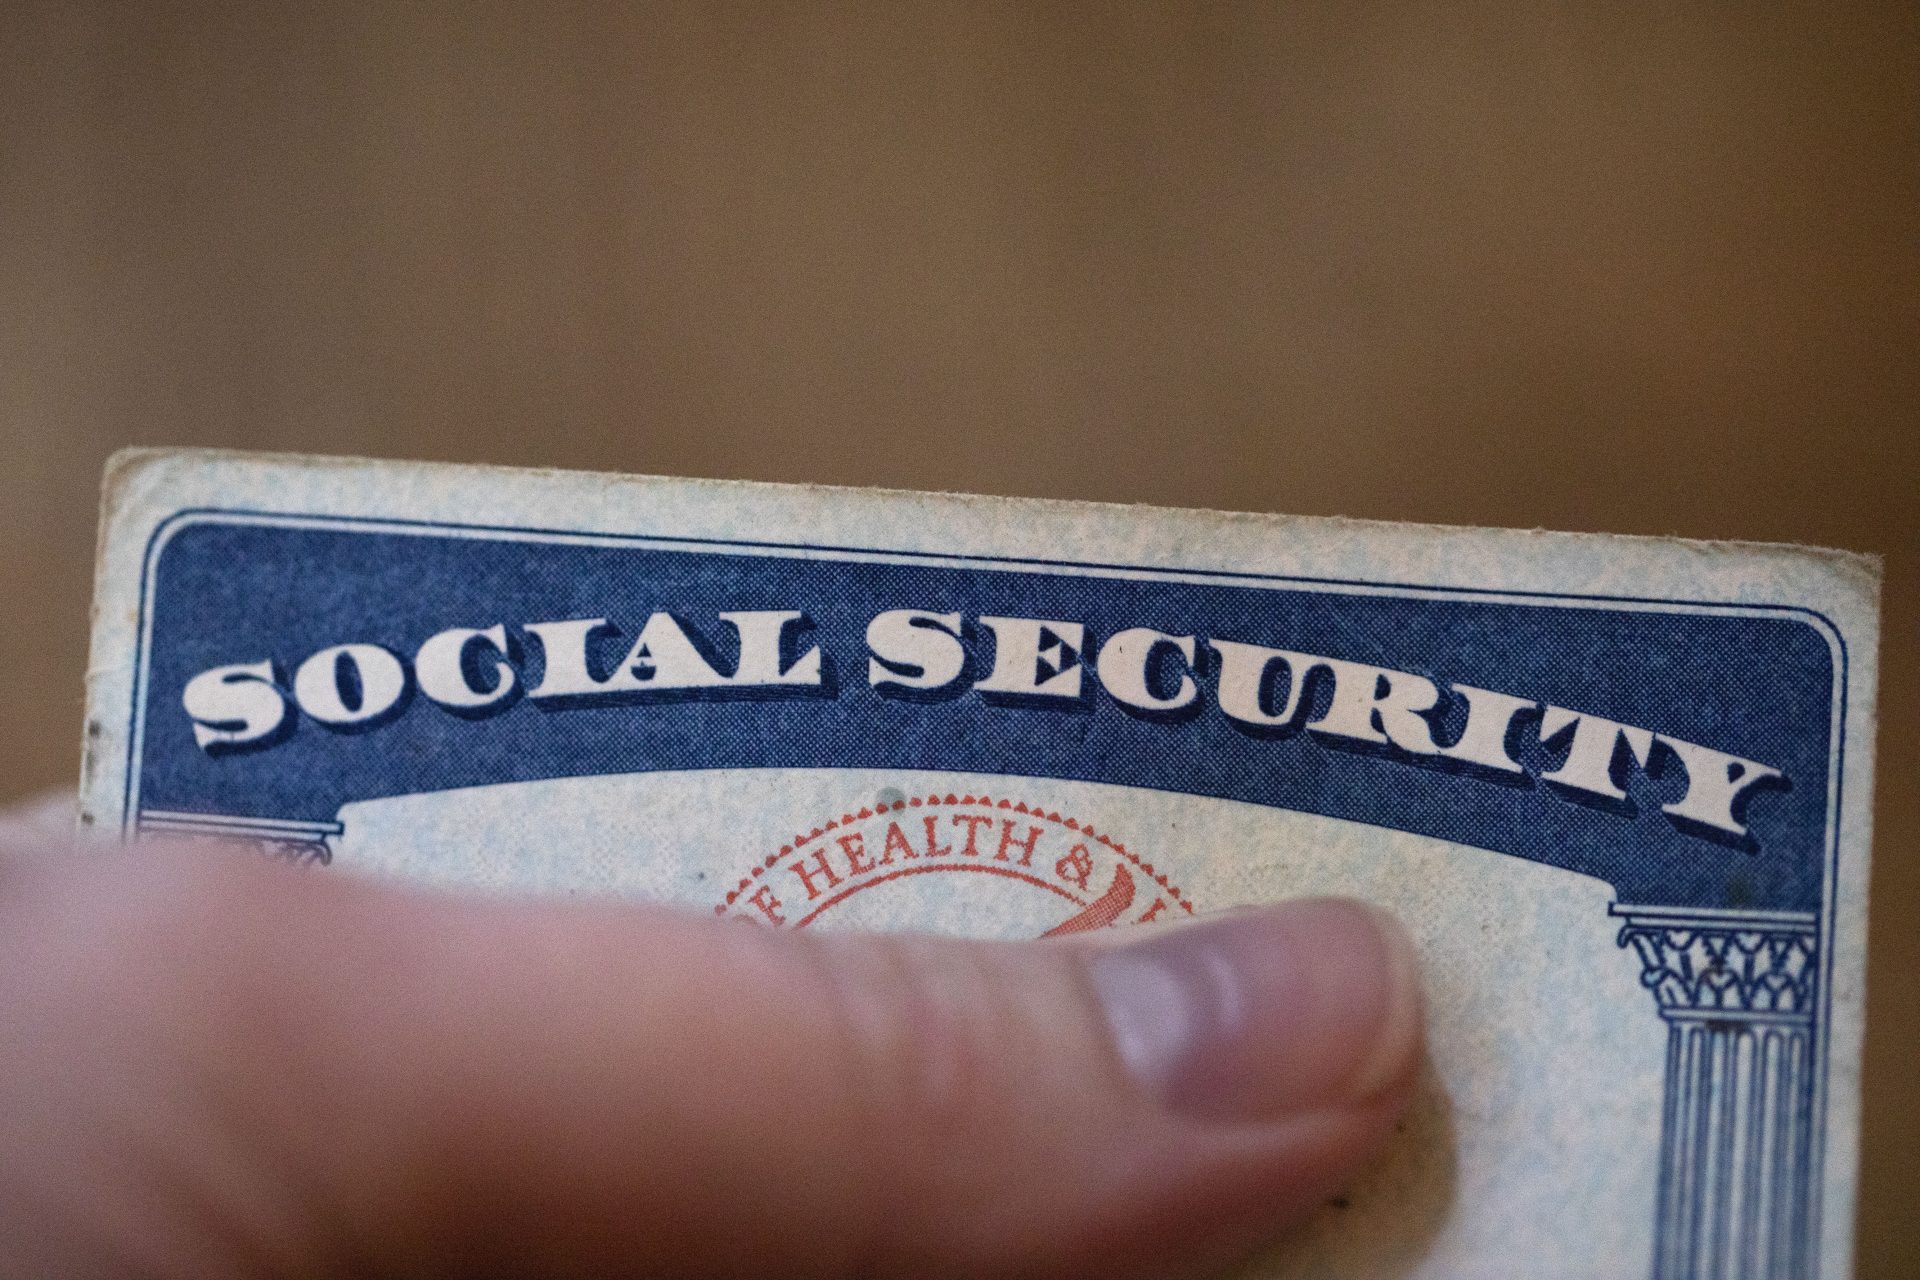 Shows a Social Security card this Tuesday, October 12, 2021, in Tigard, Ore.  Millions of retirees on Social Security will get a 5.9% increase in benefits for 2022.